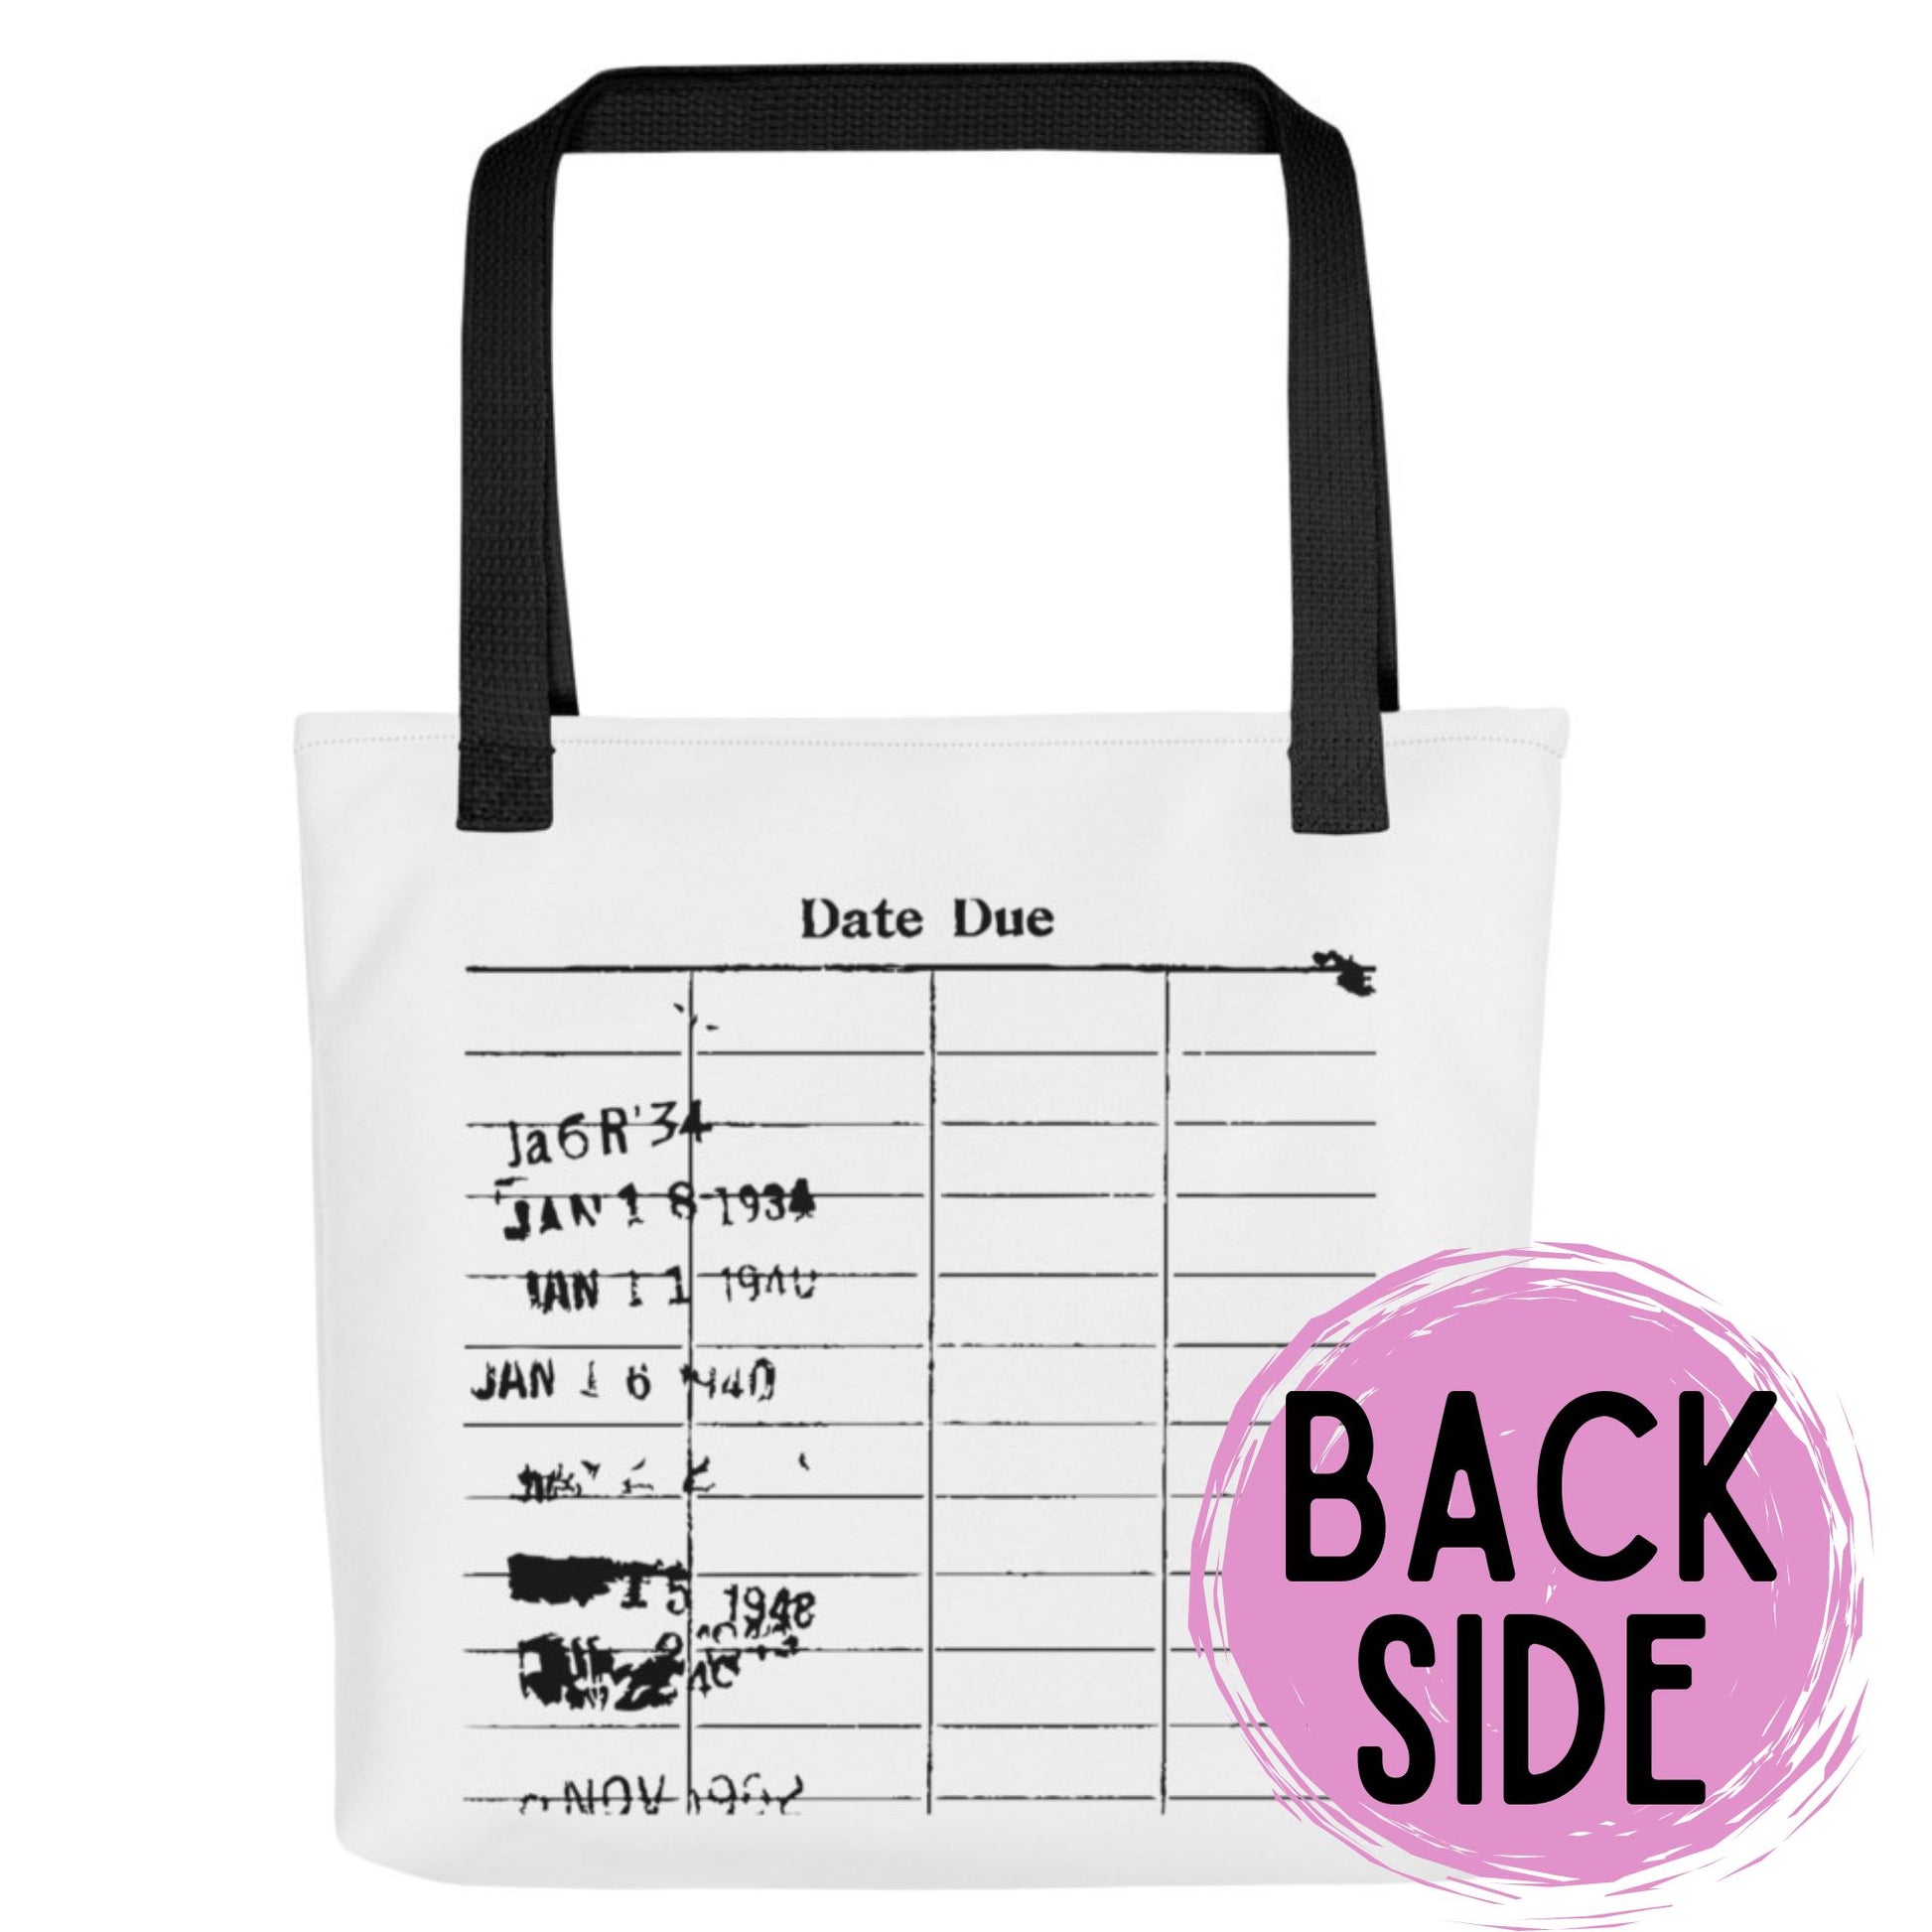 a white tote bag with black handles and a pink circle with the date due